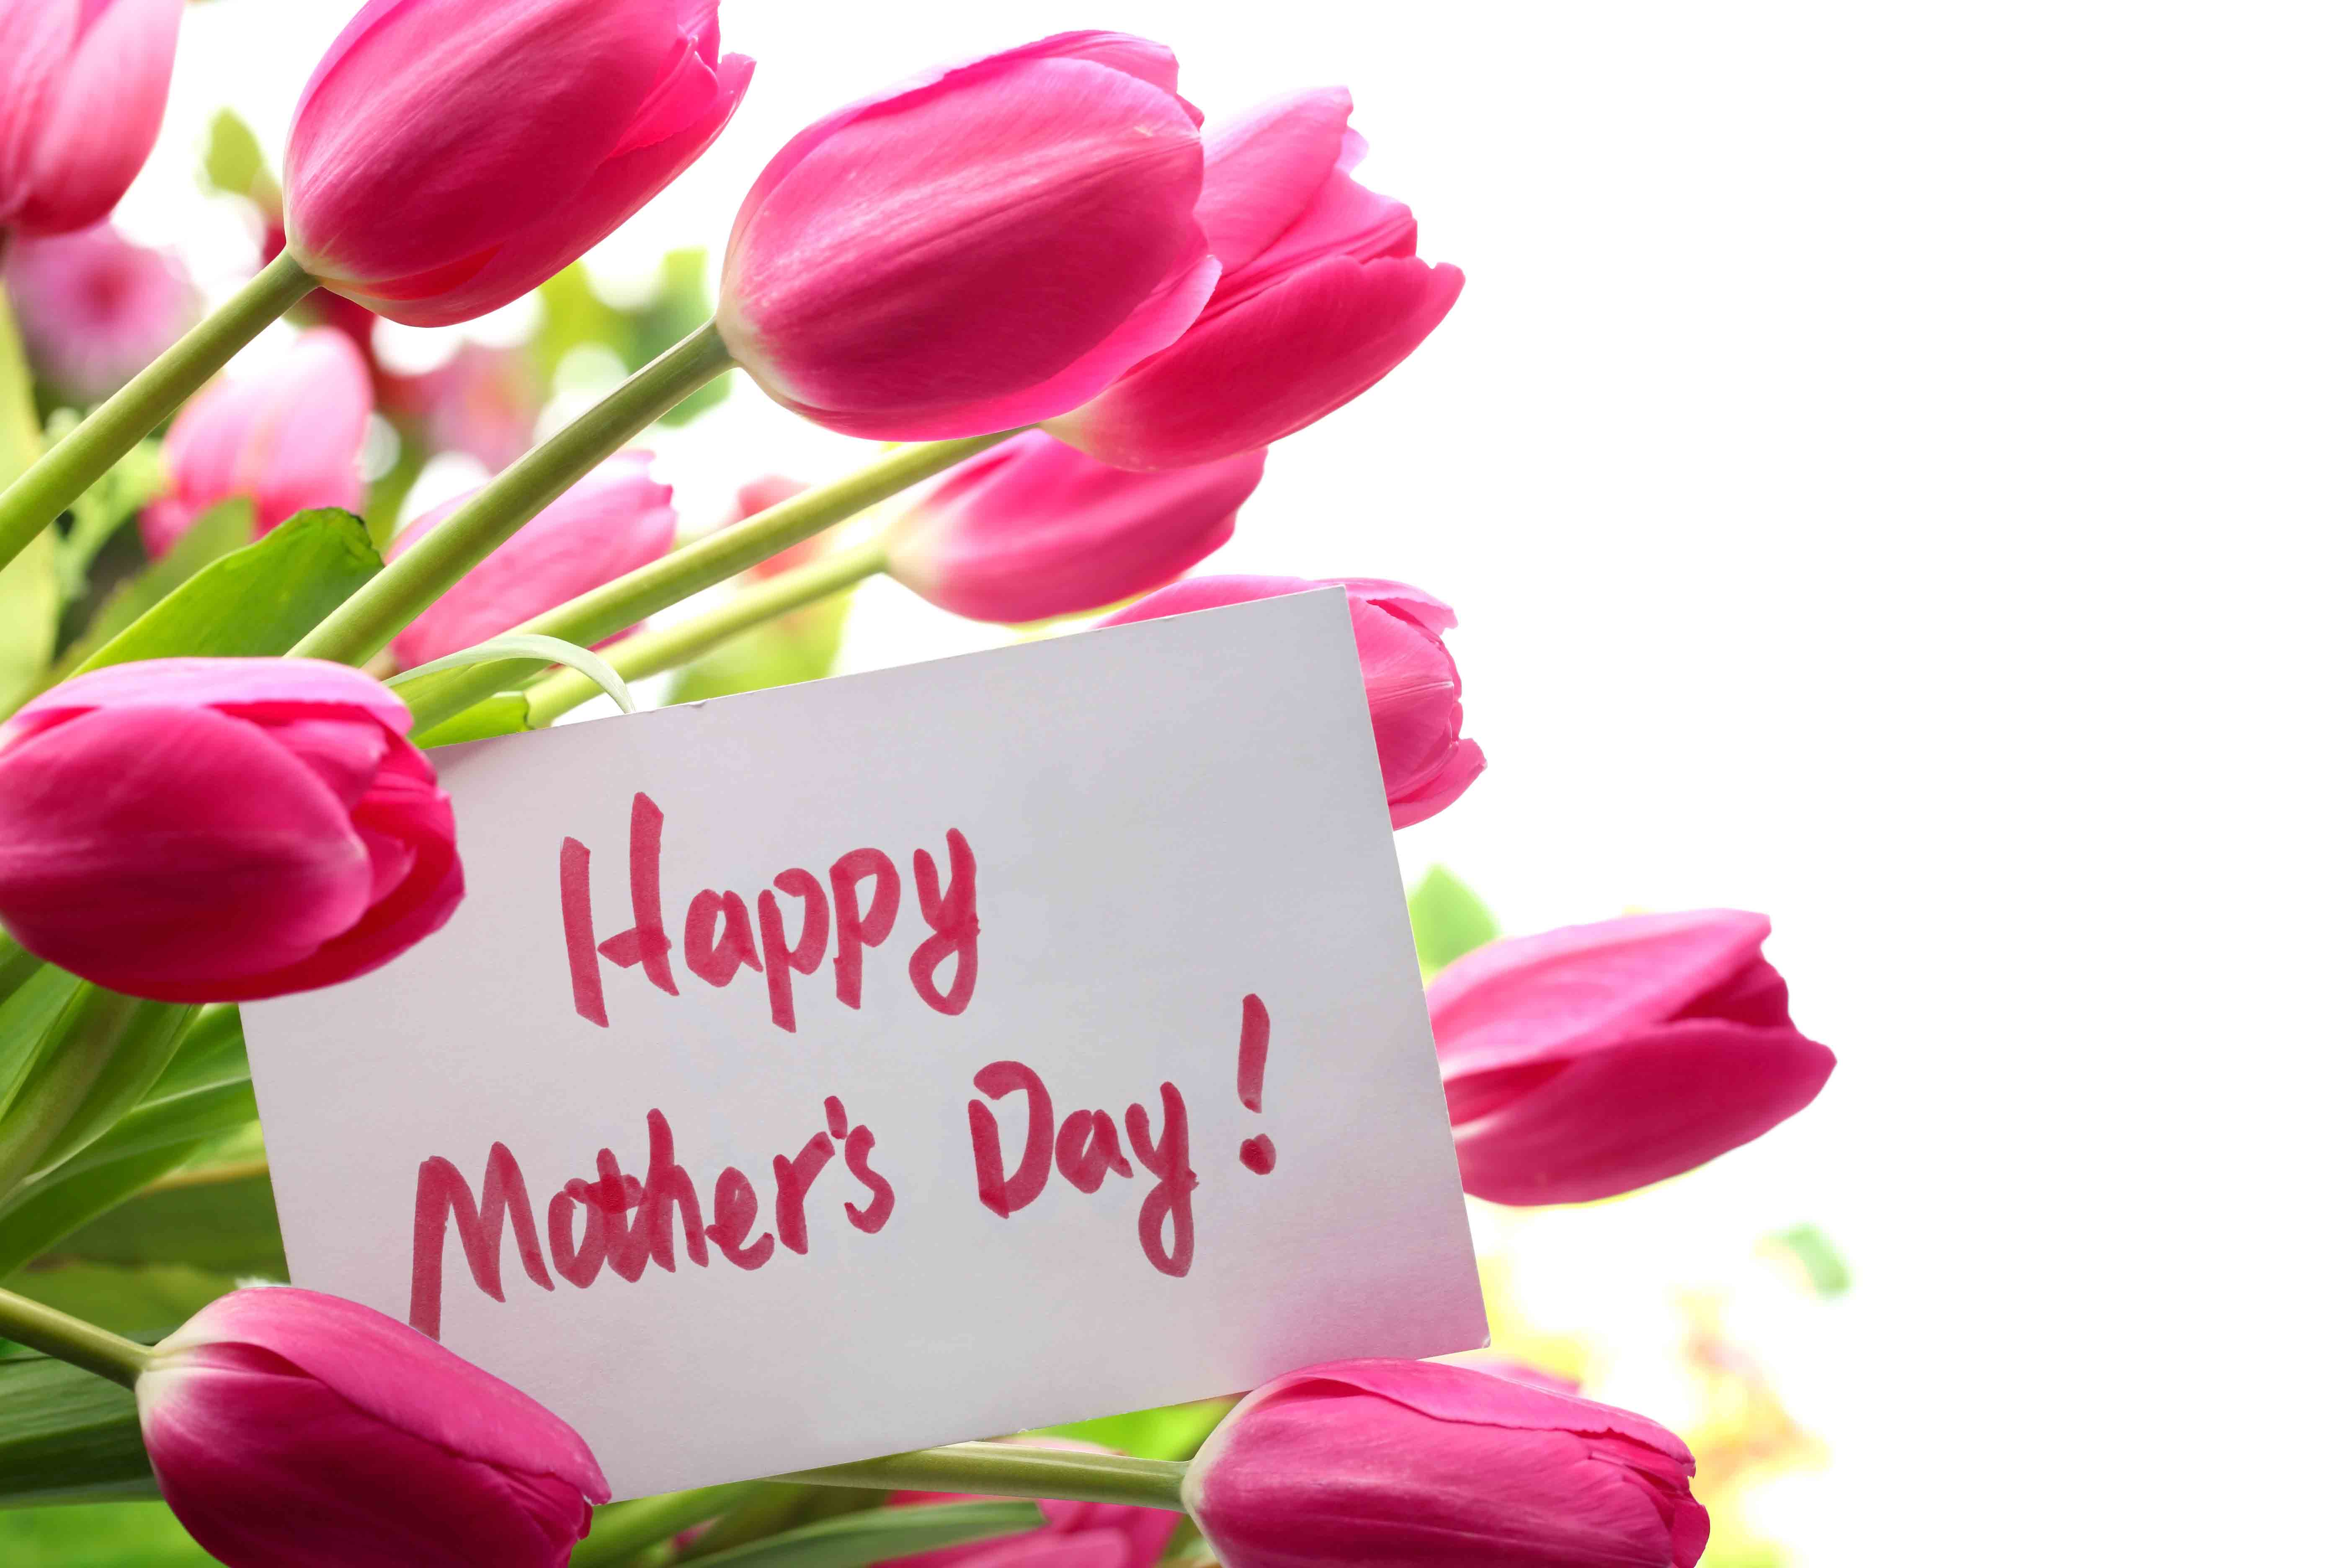 Happy Mother's Day Flowers Image